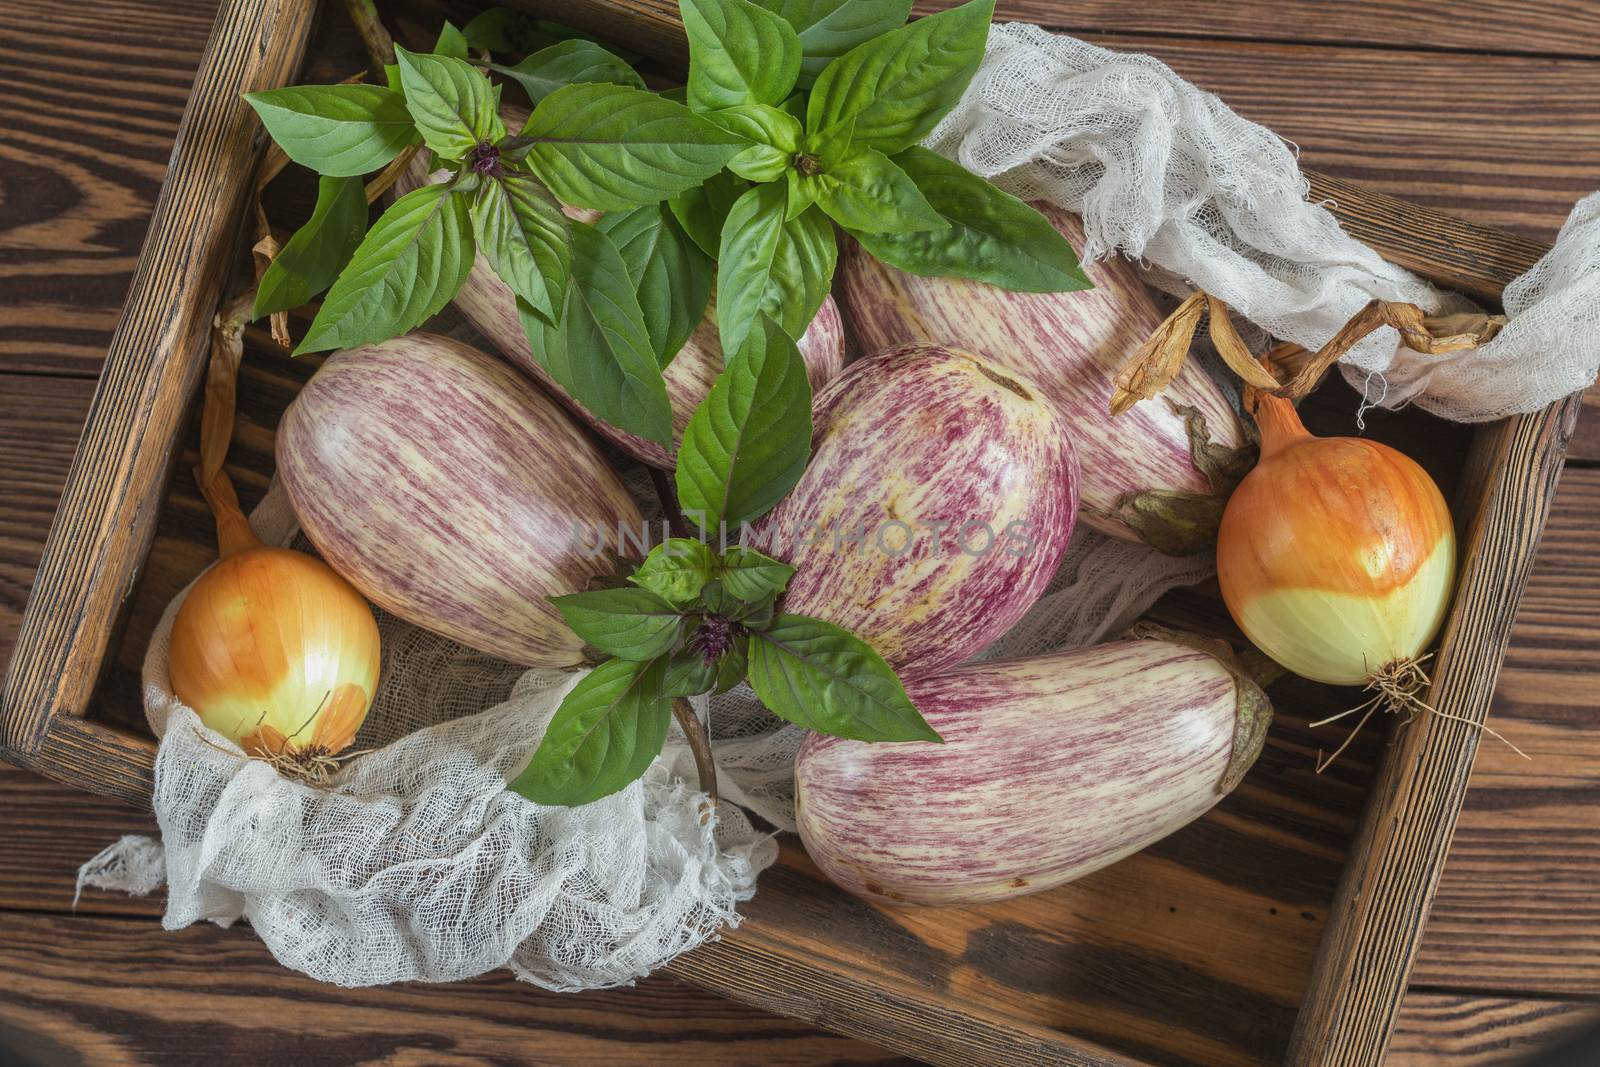 Purple graffiti eggplants, onion and green fresh basil in a wooden box in a vintage wooden background in rustic style, selective focus